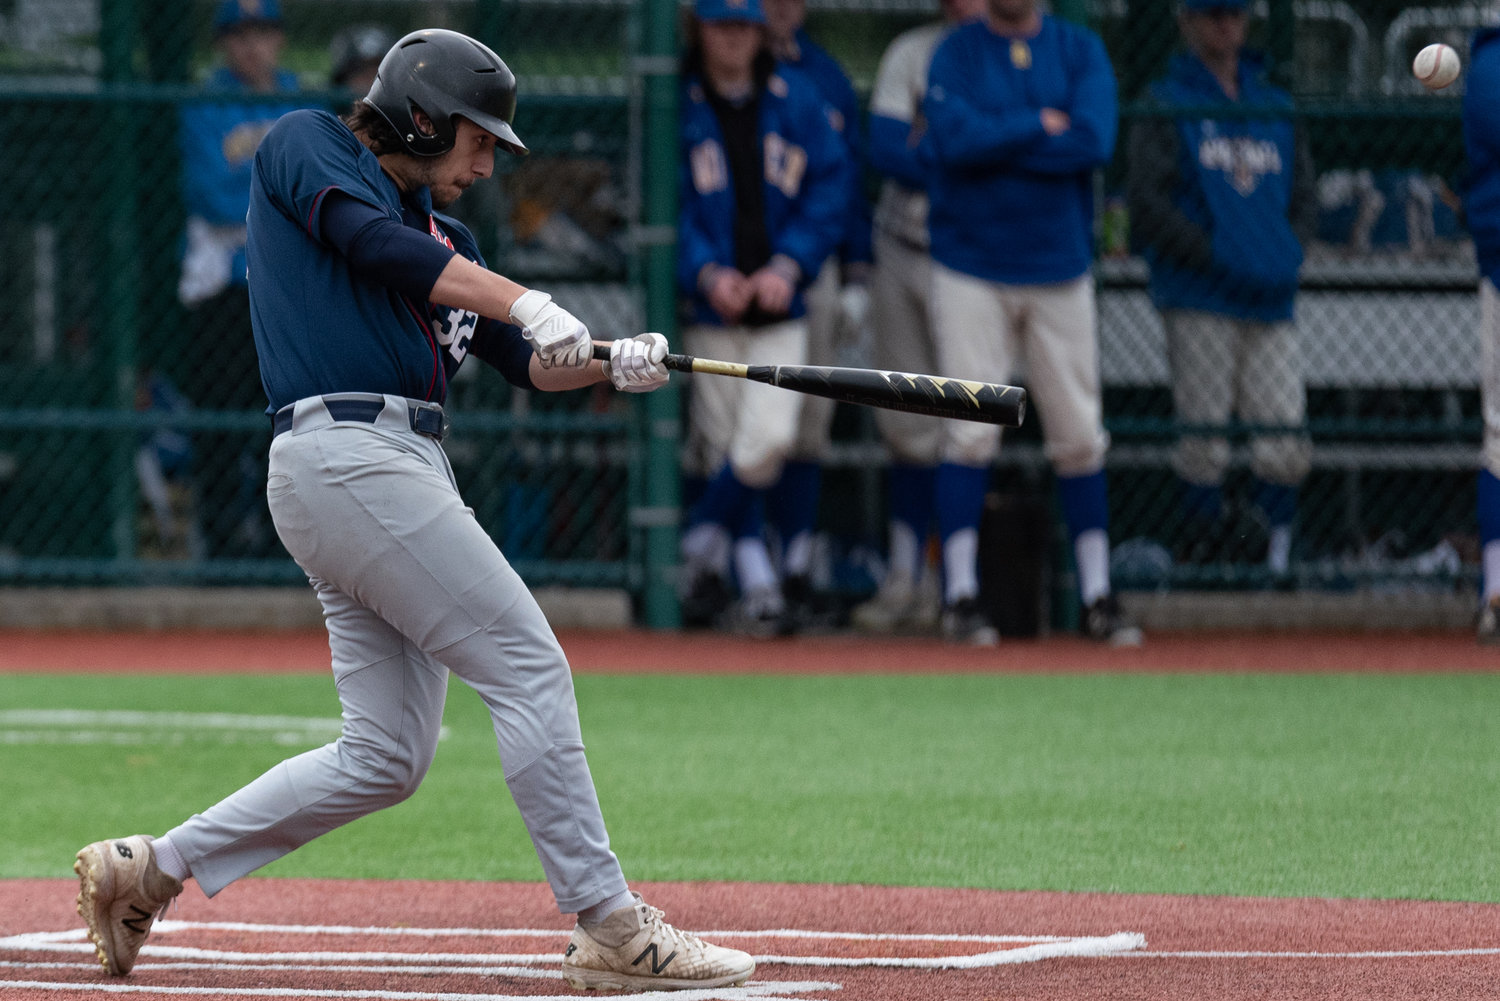 Black Hills first baseman Orion Pate takes a swing at a pitch against Rochester in a play-in game at the Regional Athletic Complex in Lacey May 6.